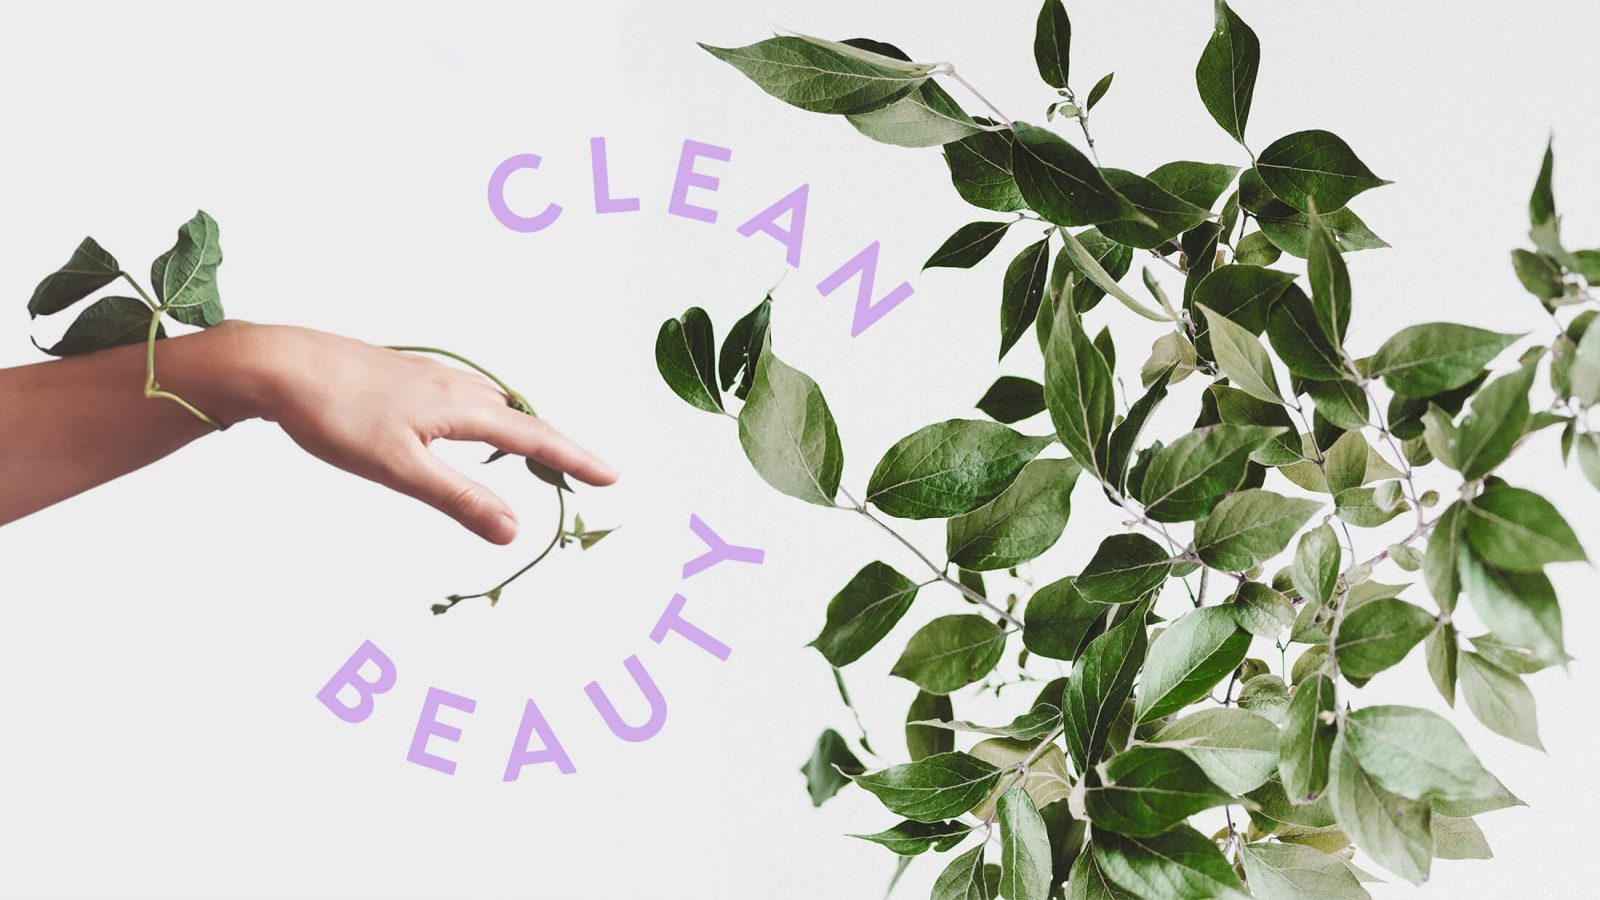 WOW 360|Trend Alert: All You Need To Know About the 'Clean Beauty' Trend in 2020!